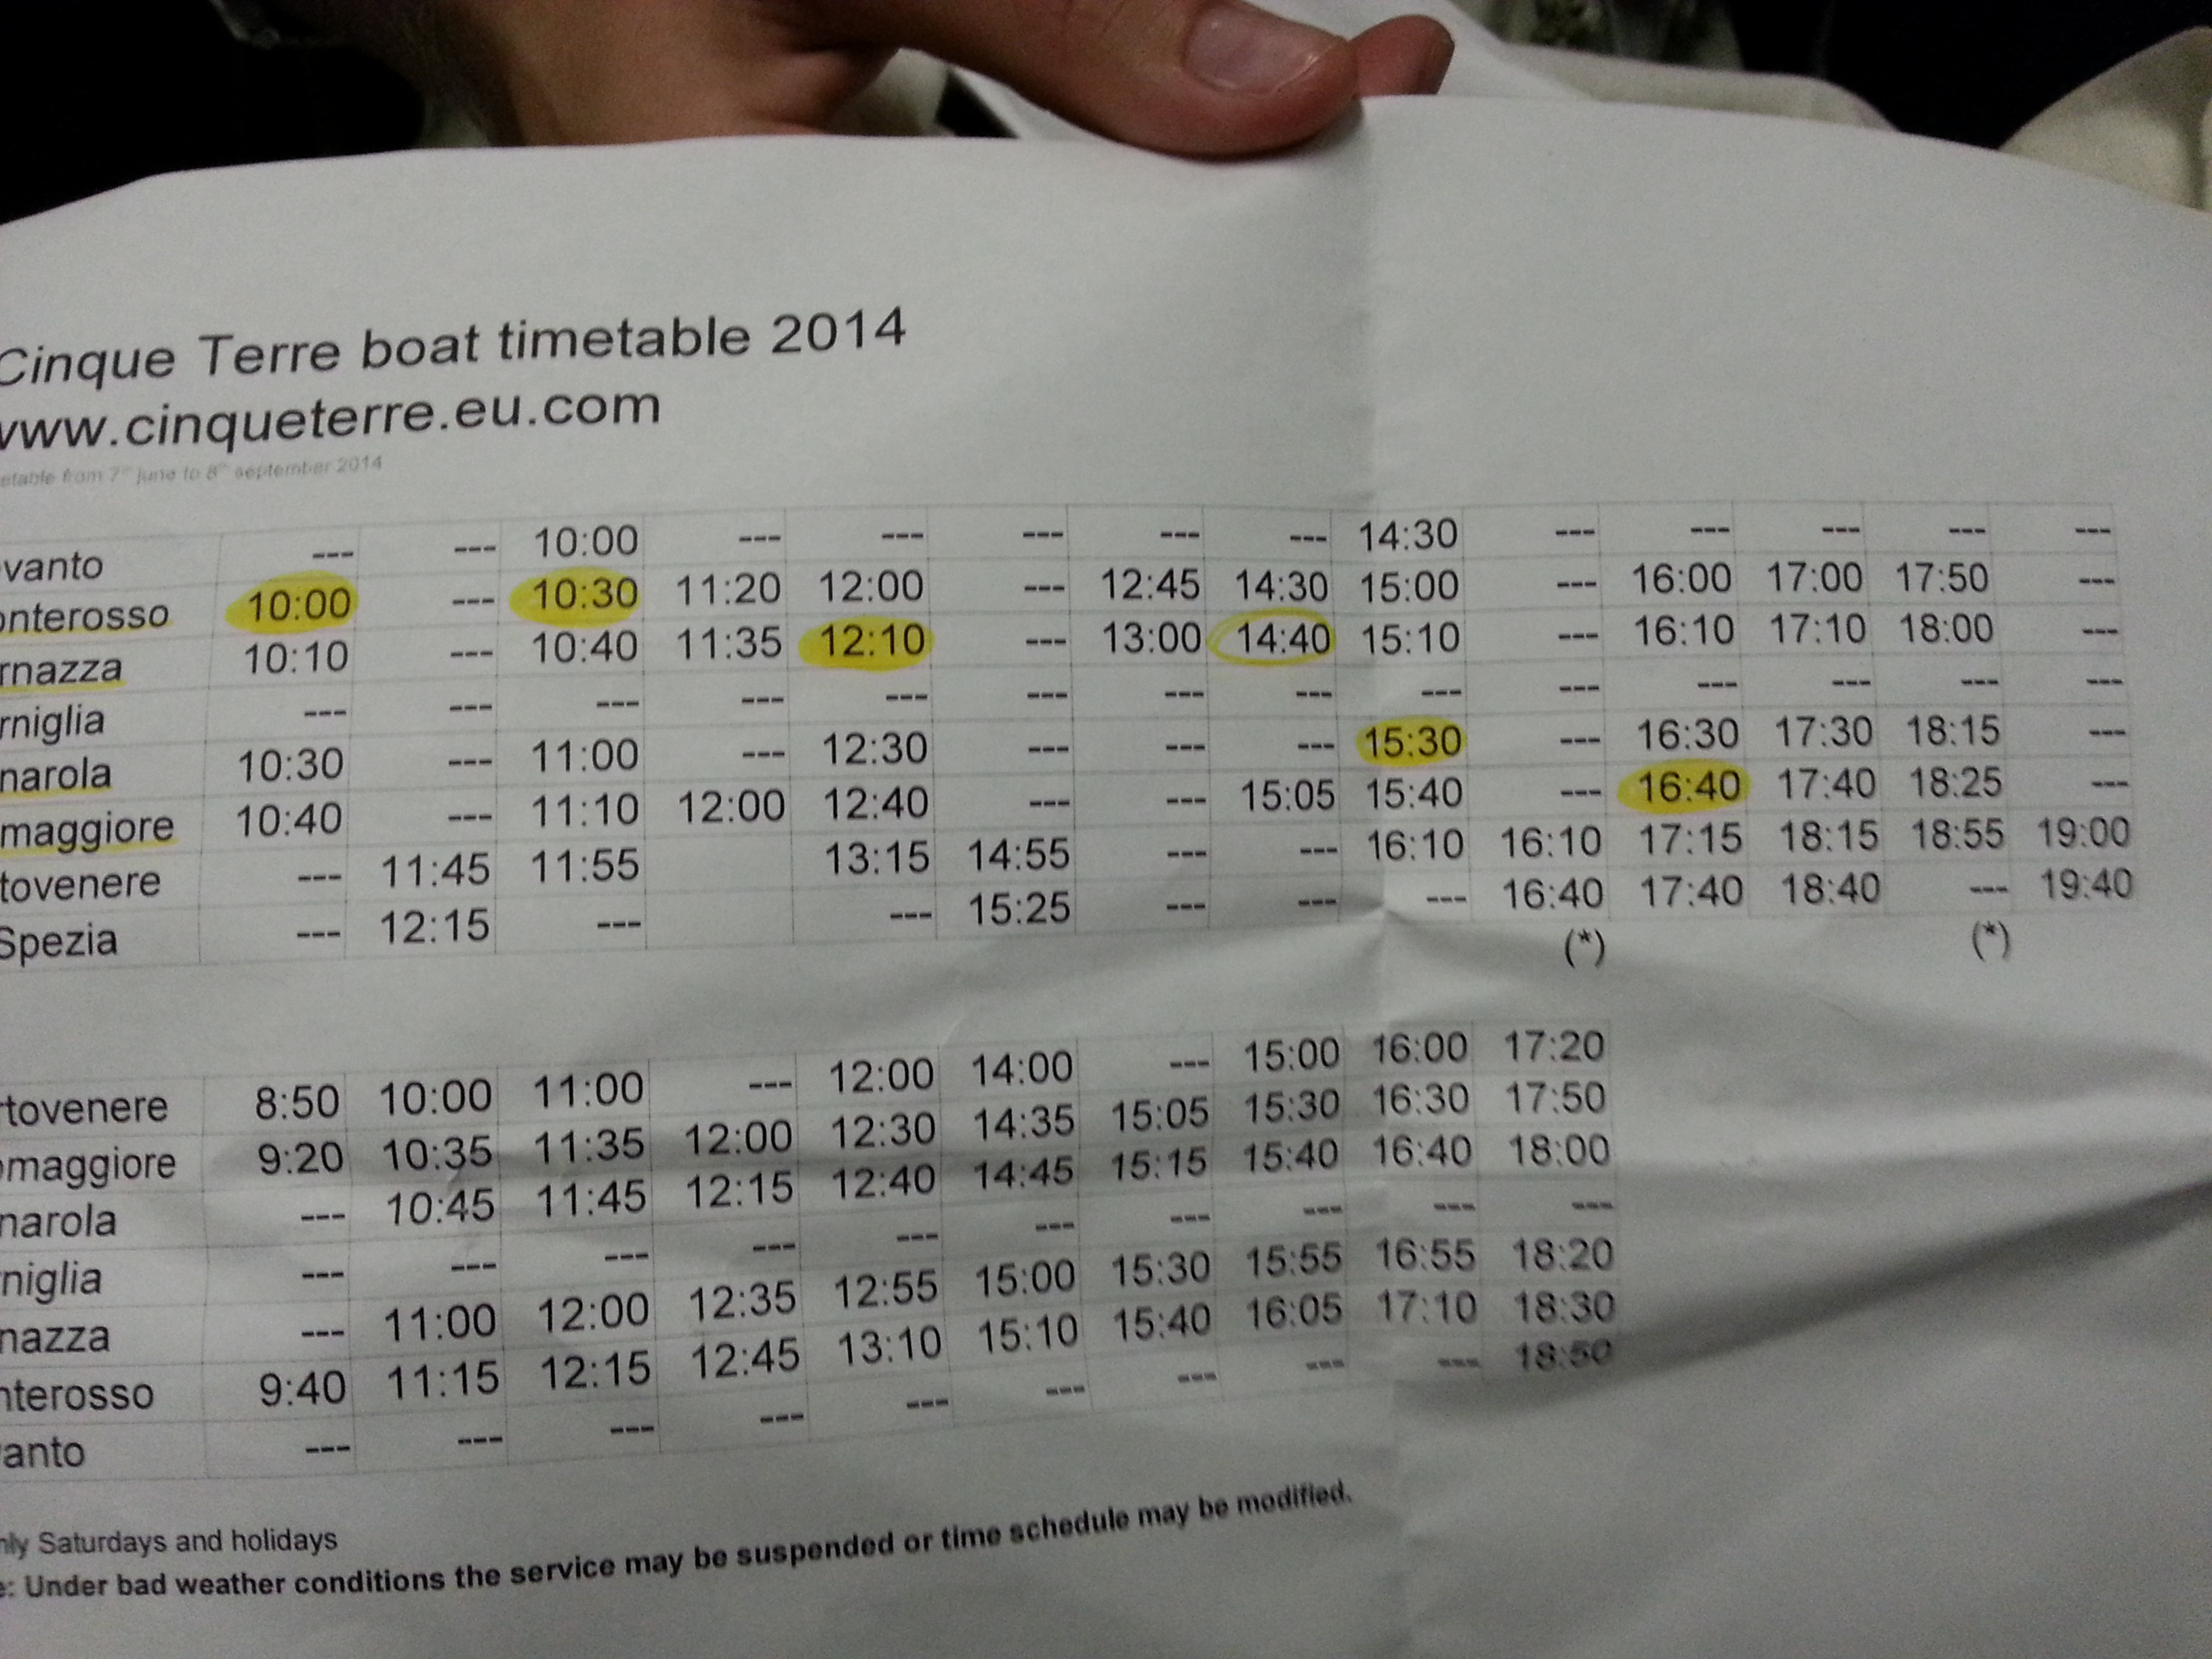 Our trusty boat timetable